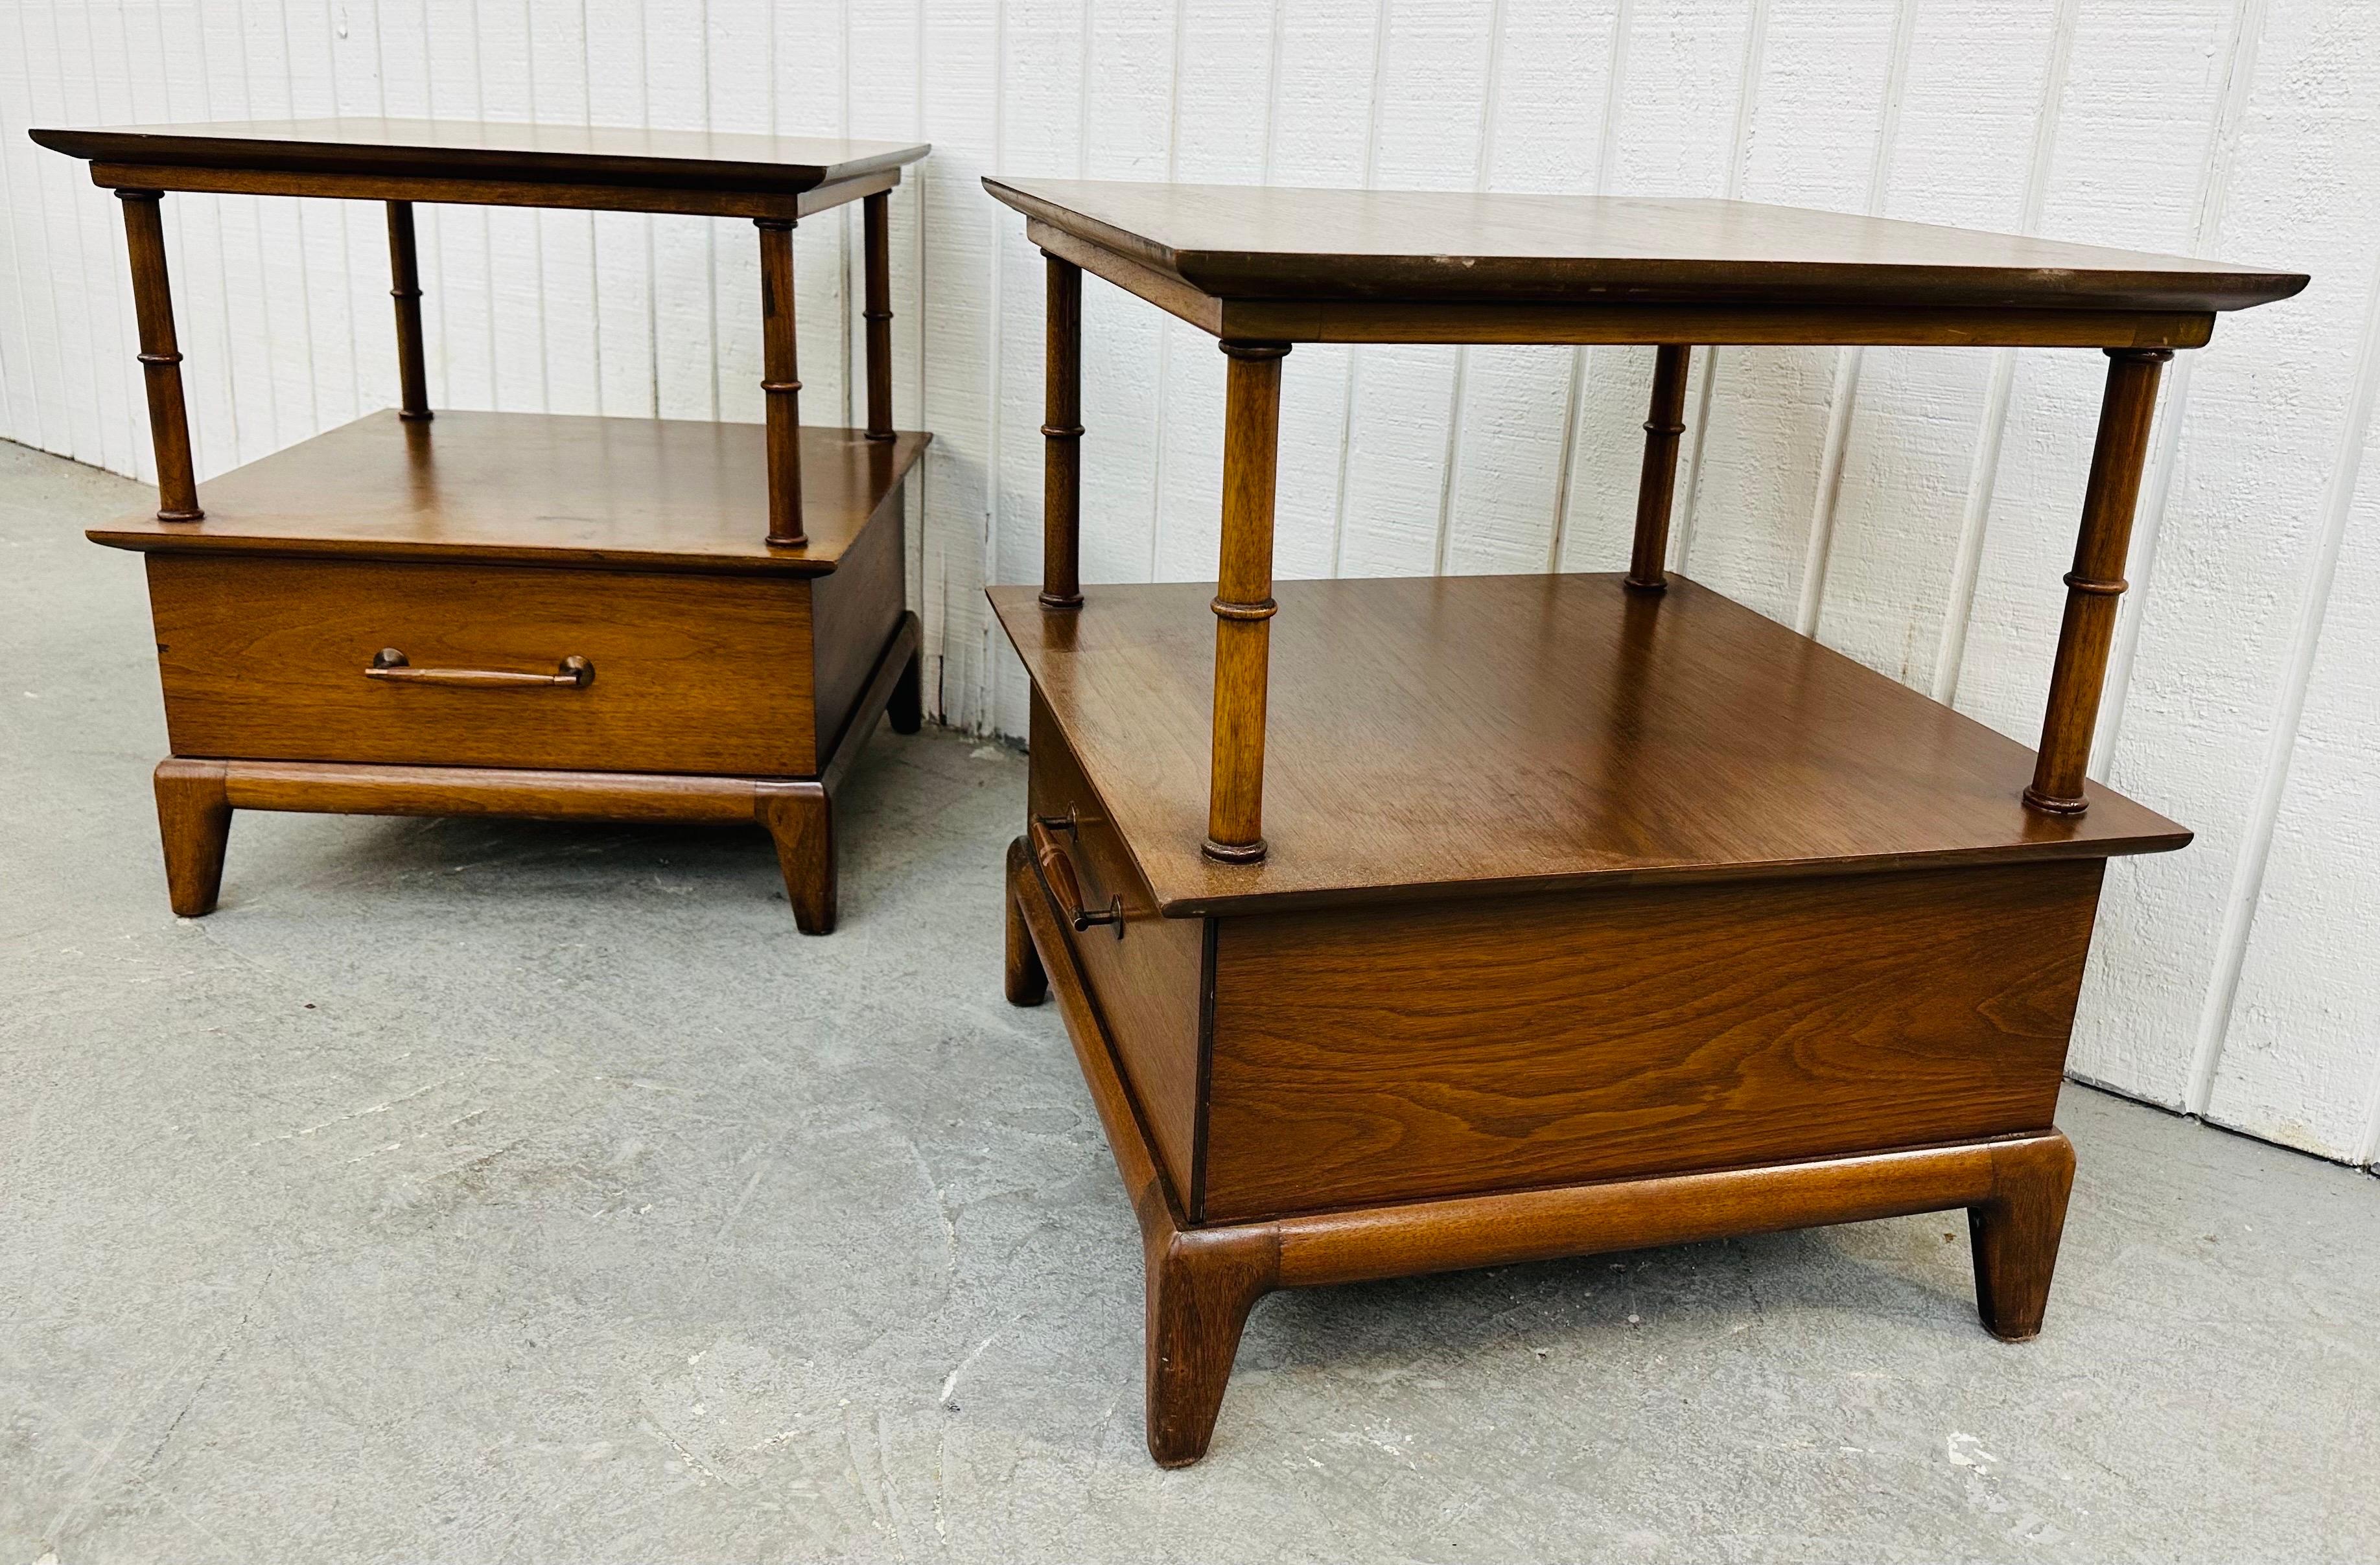 This listing is for a pair of Mid-Century Modern Henredon Walnut Nightstands. Featuring raised square tops resting on wooden pillars, a bottom tier for storage space, a single drawer with wooden pulls, modern legs, and a beautiful walnut finish.